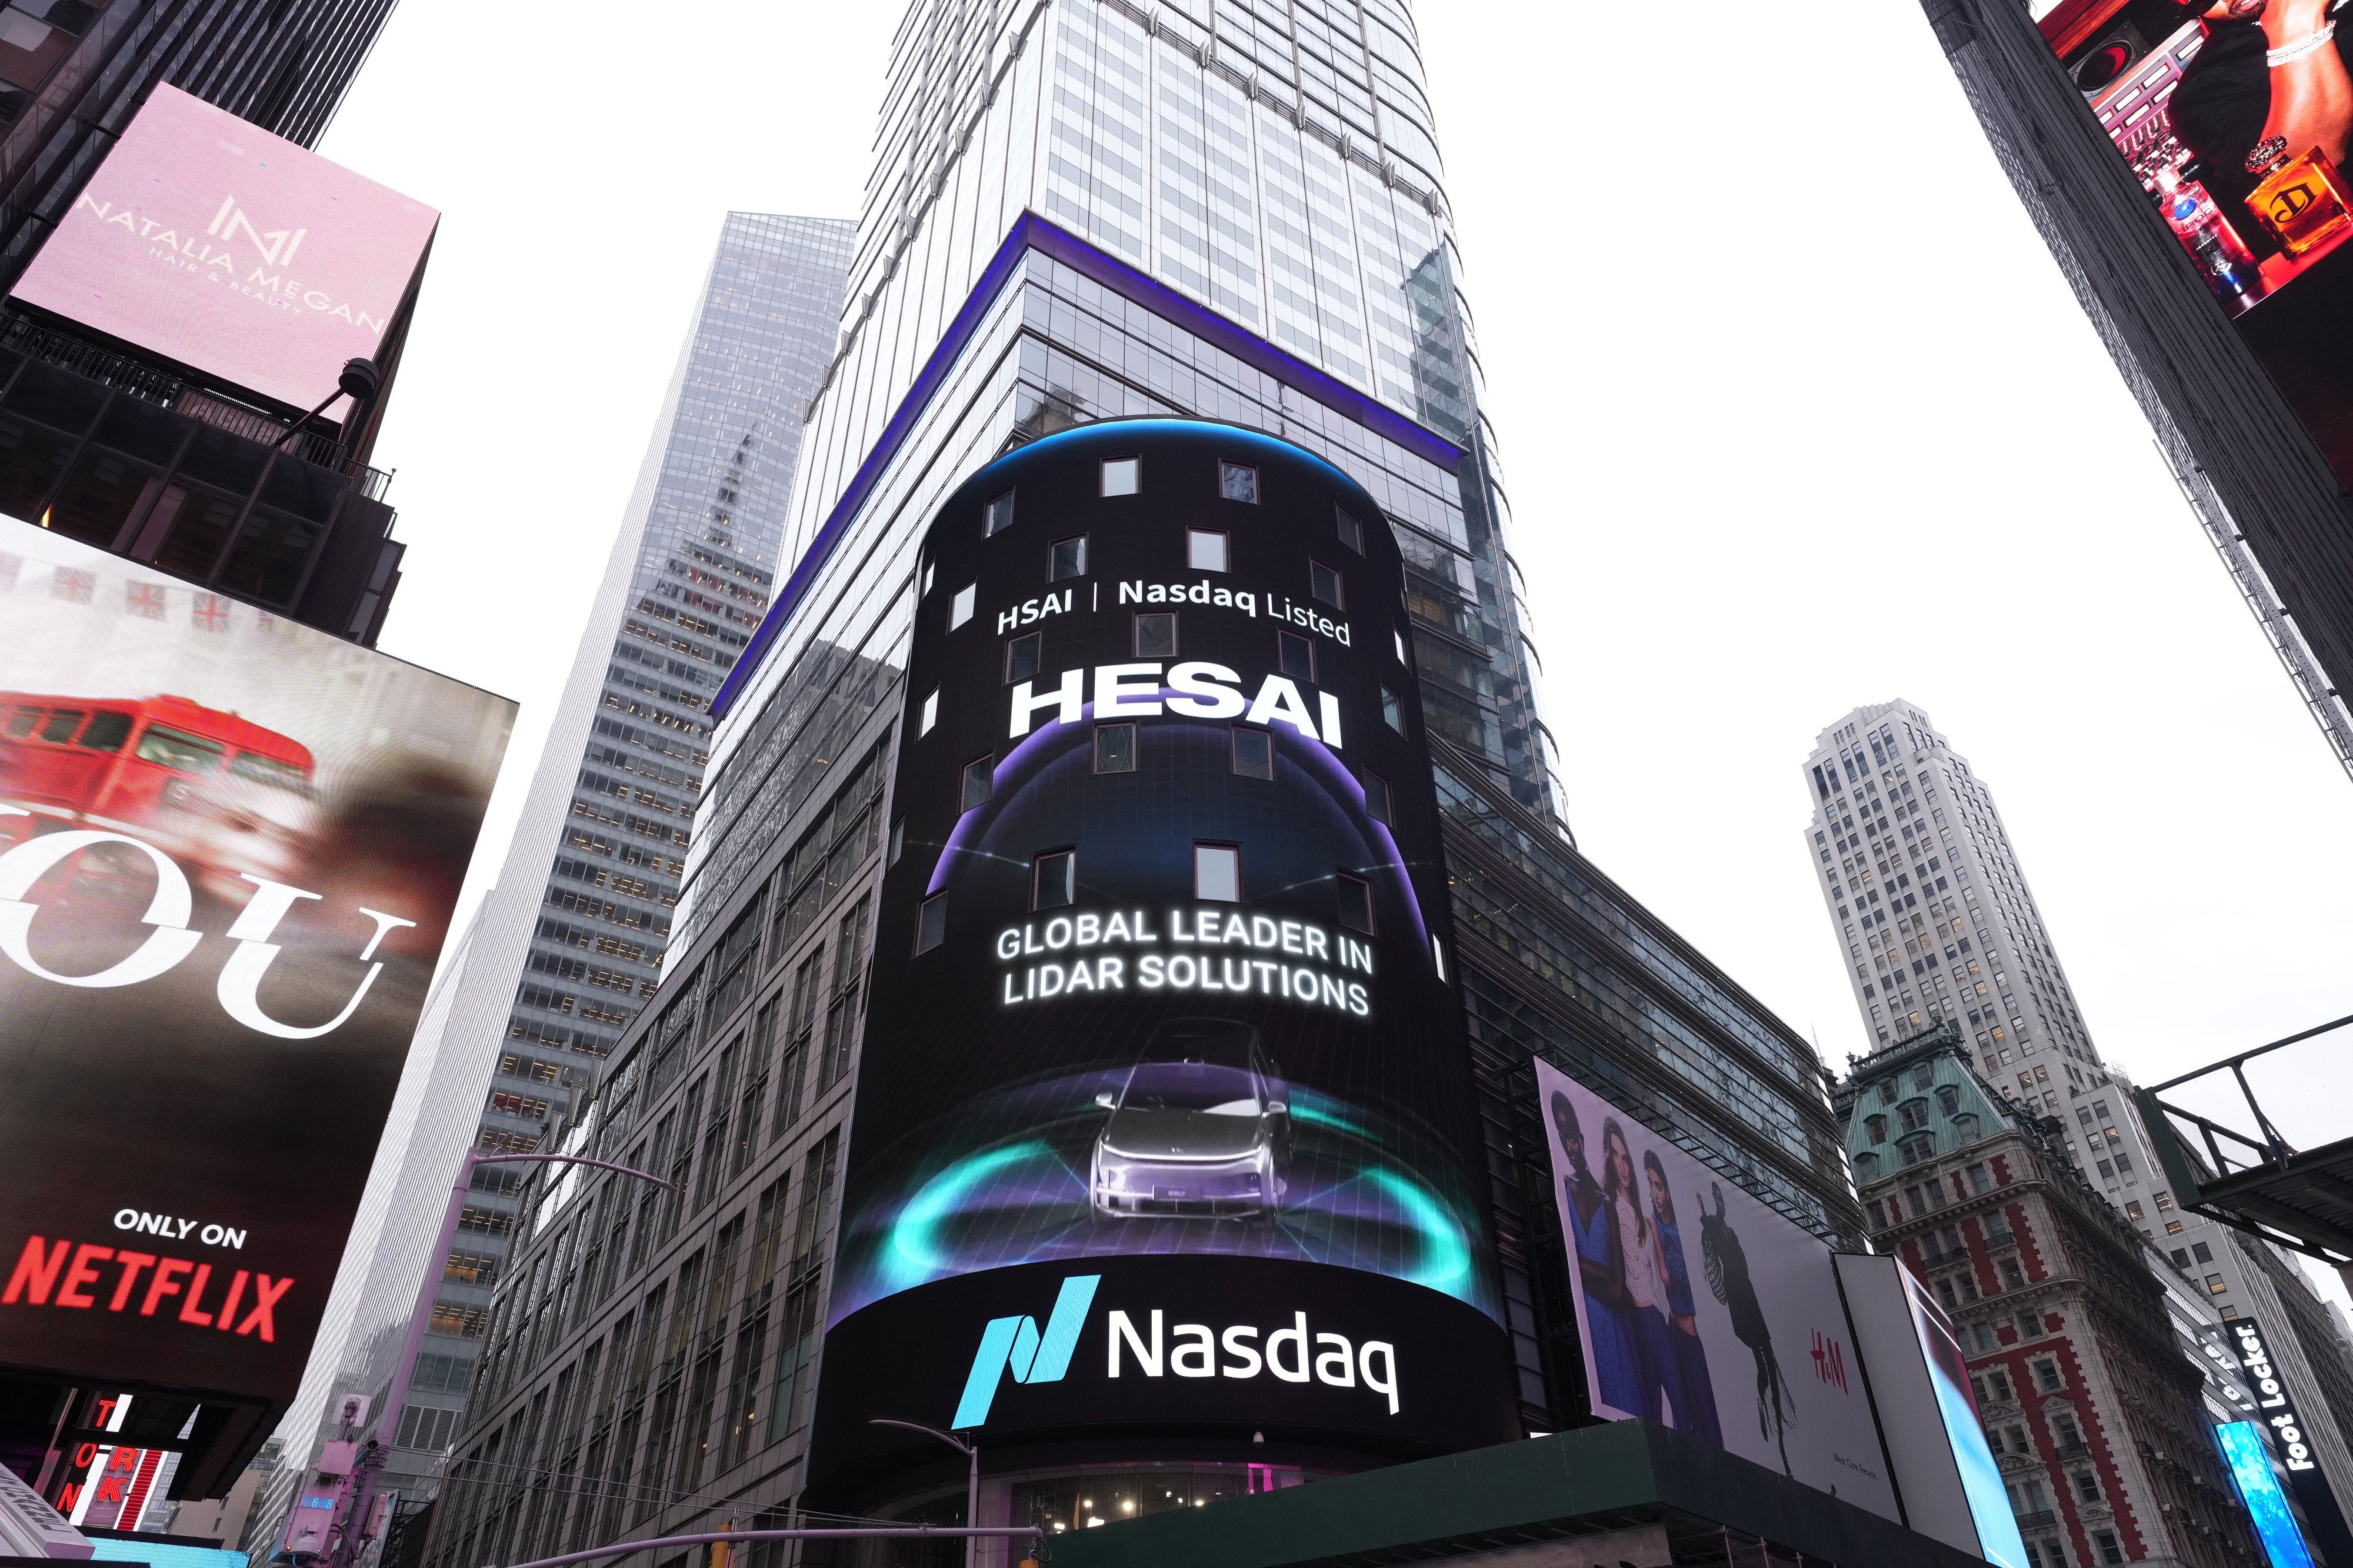 Nasdaq-listed Hesai has sued the US Department of Defence for including it on a list of companies accused of aiding the Chinese military. Photo: Handout